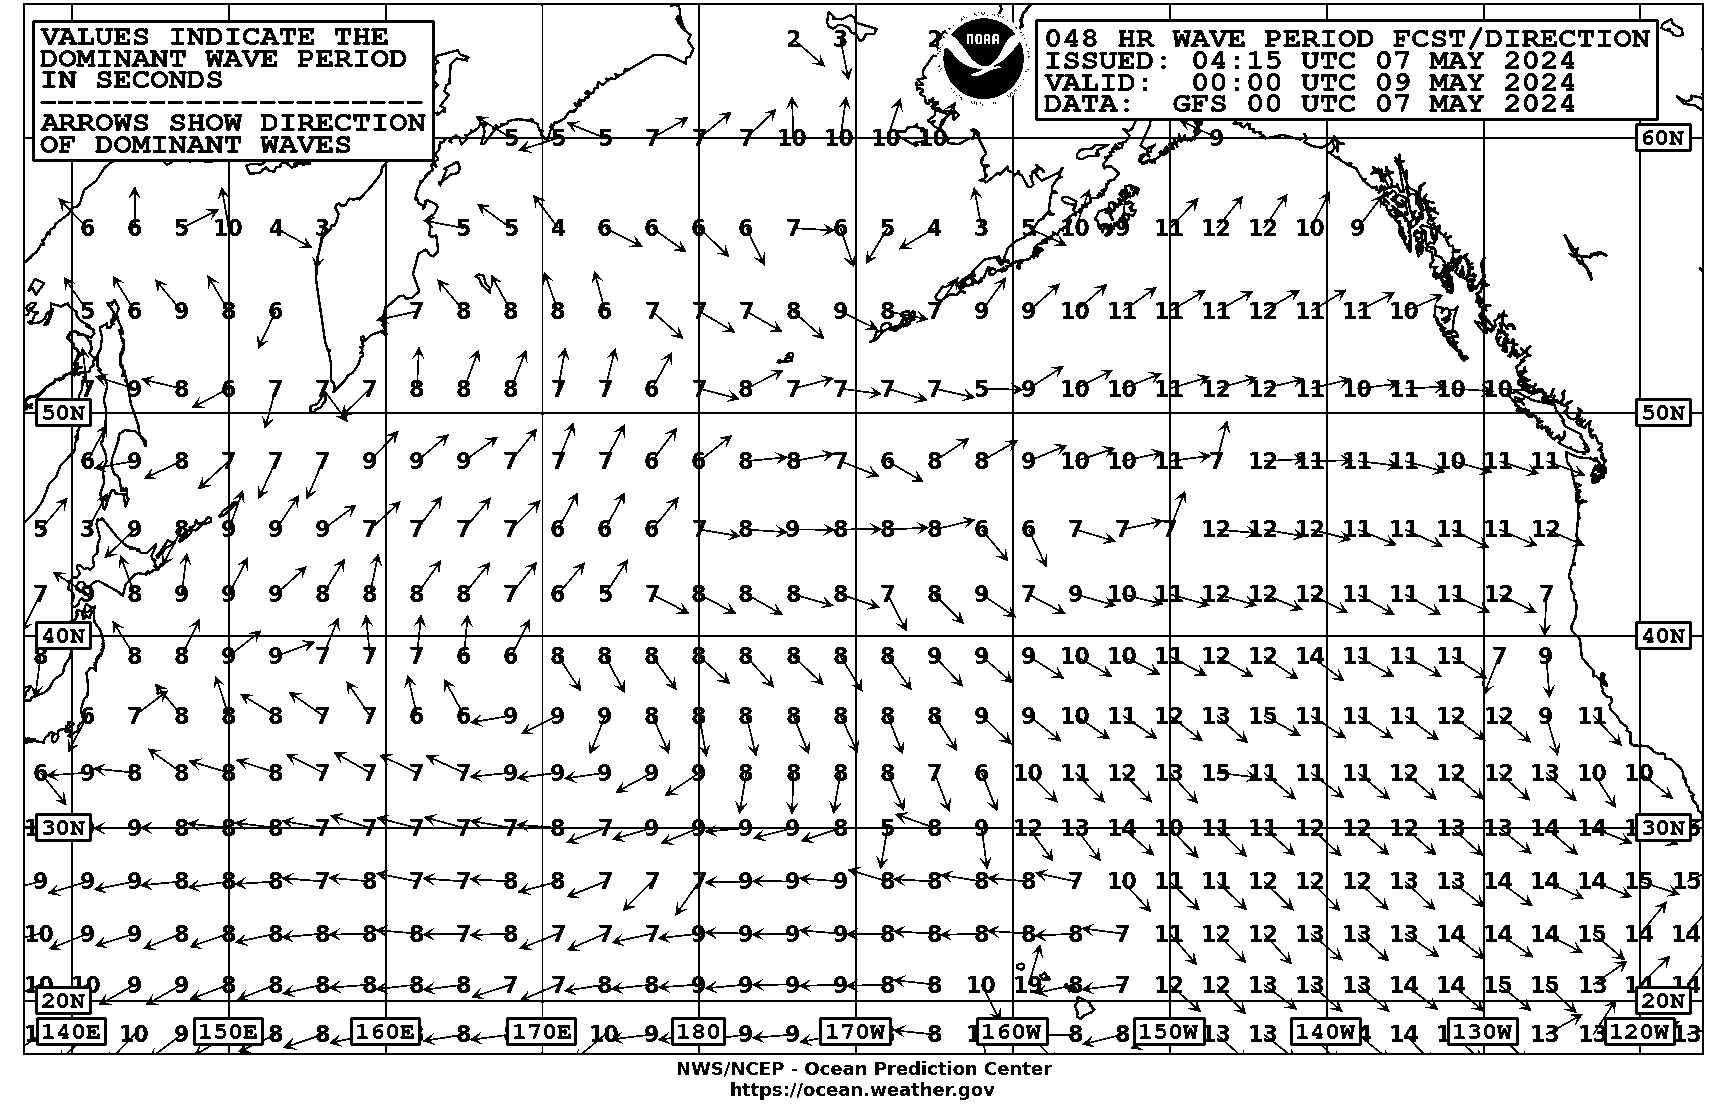 48 hour Pacific wave period